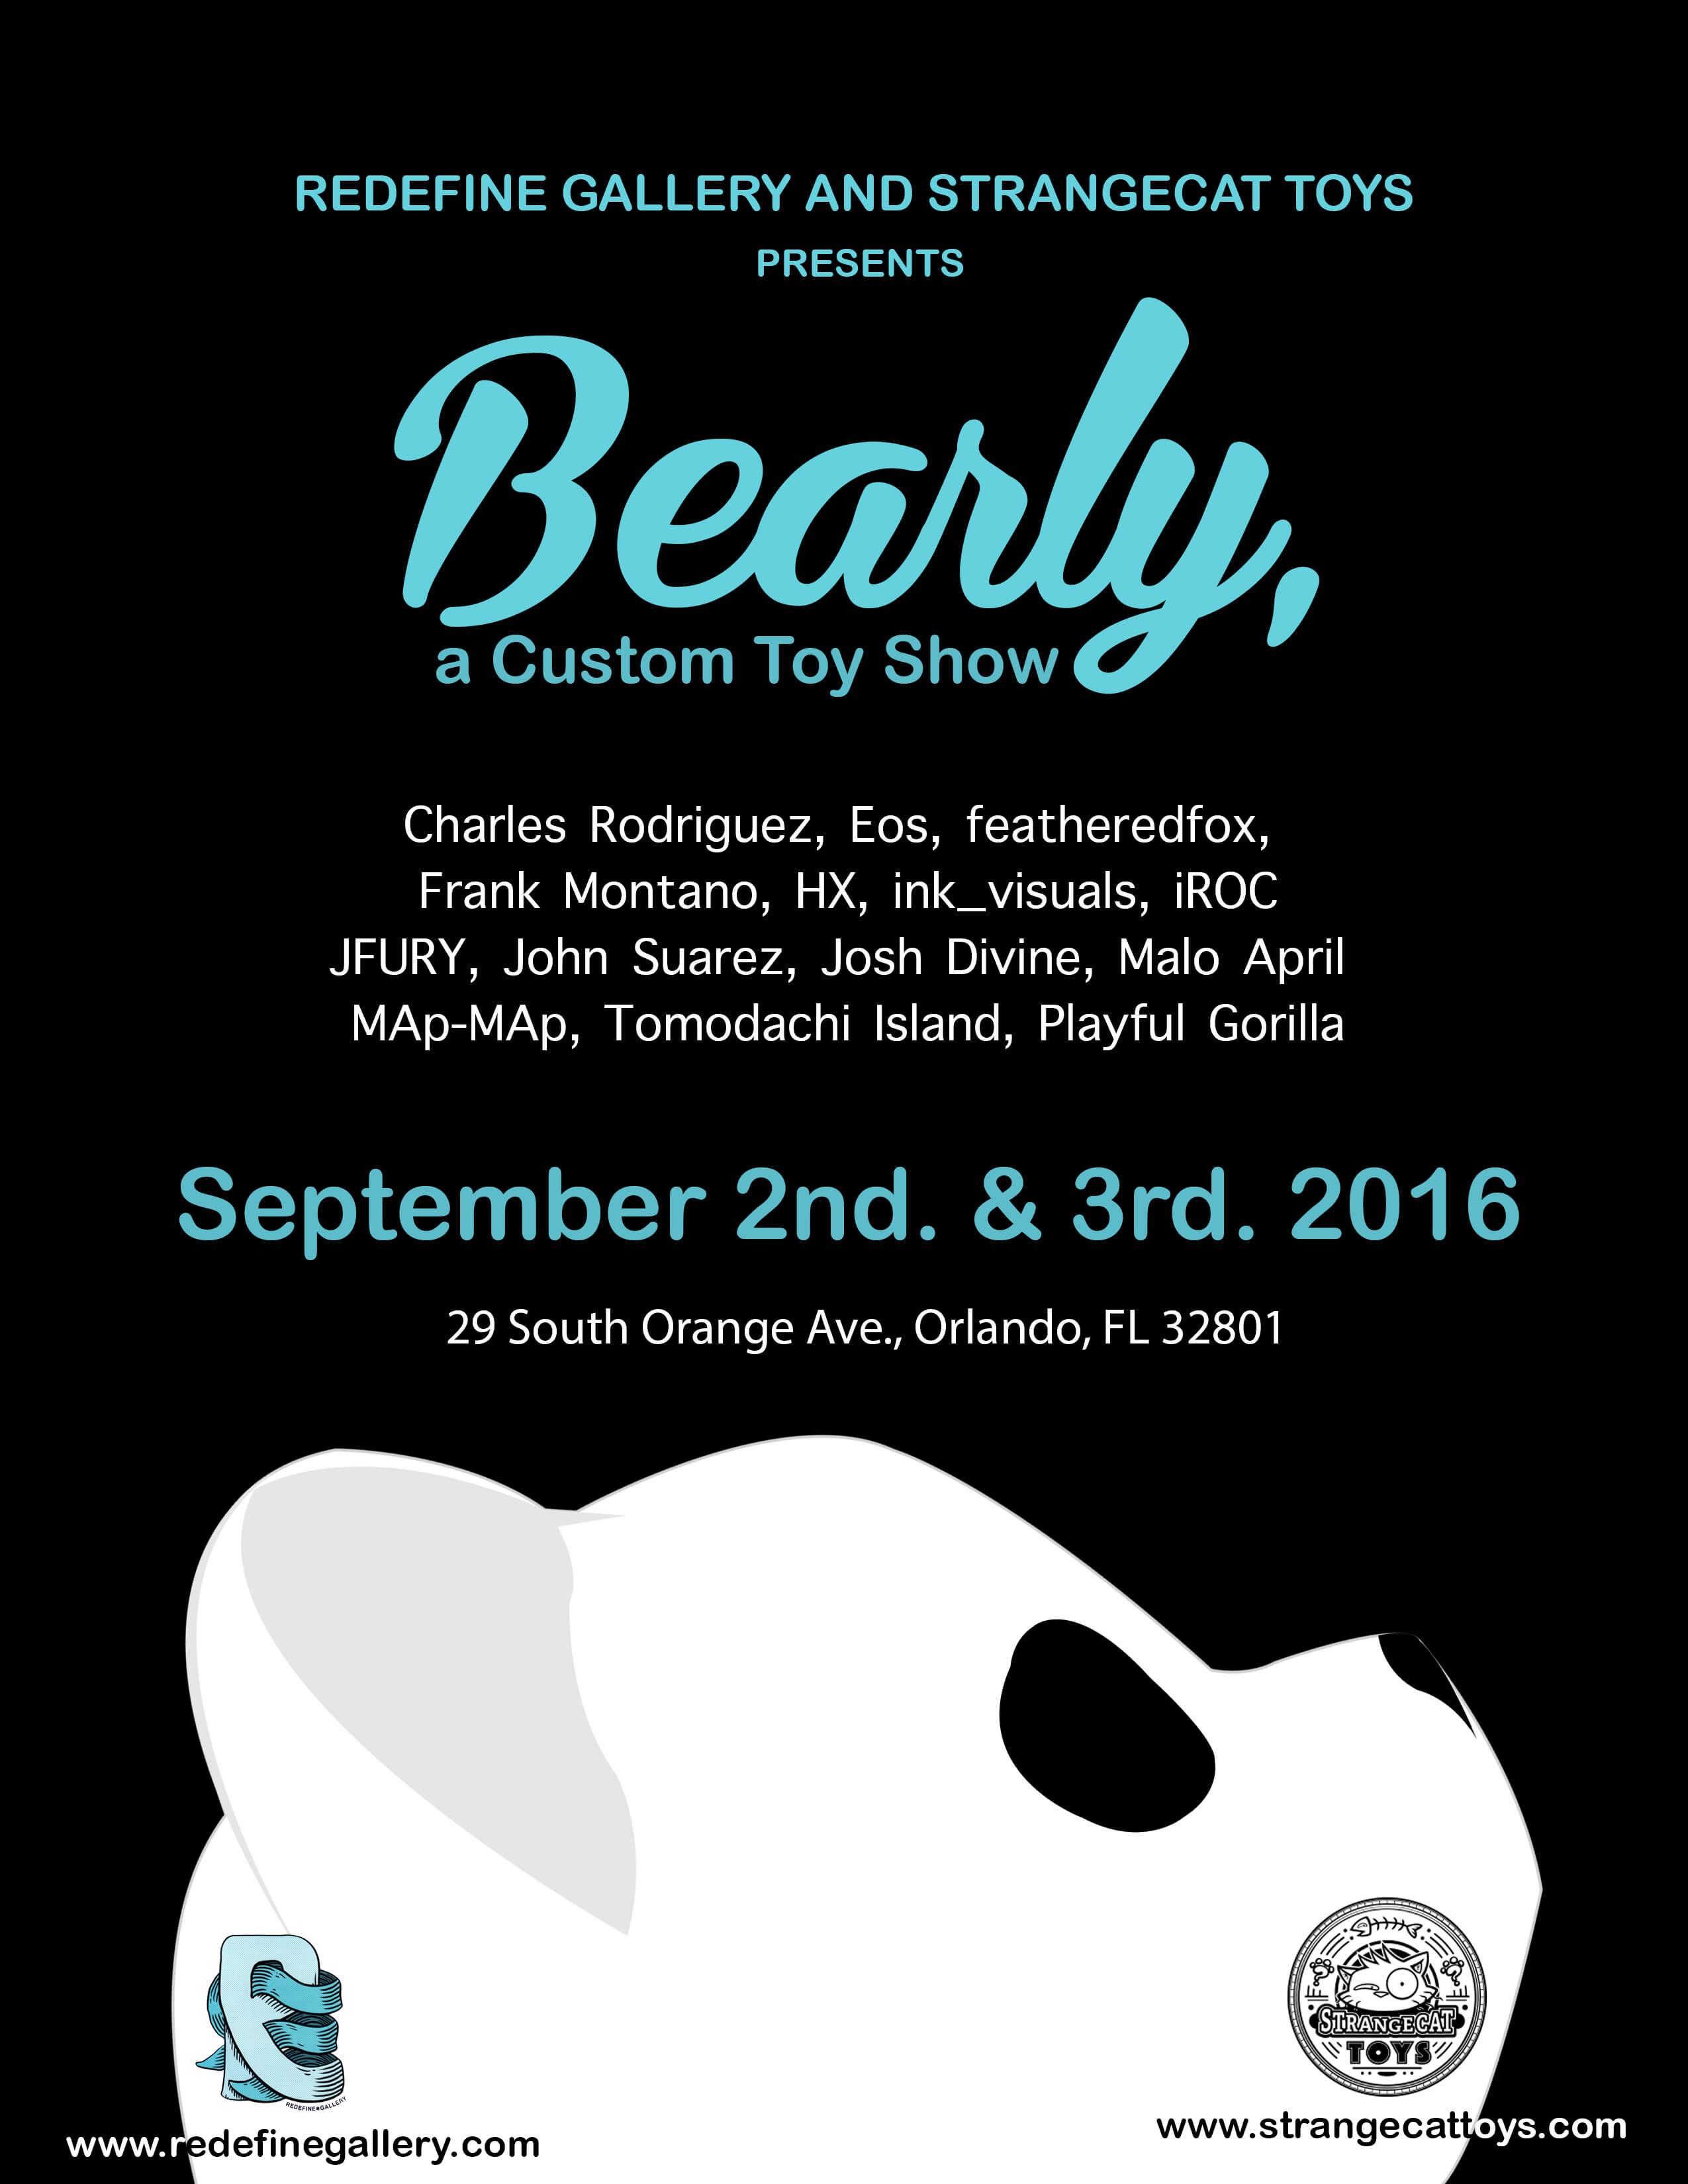 Bearly, a custom toy show